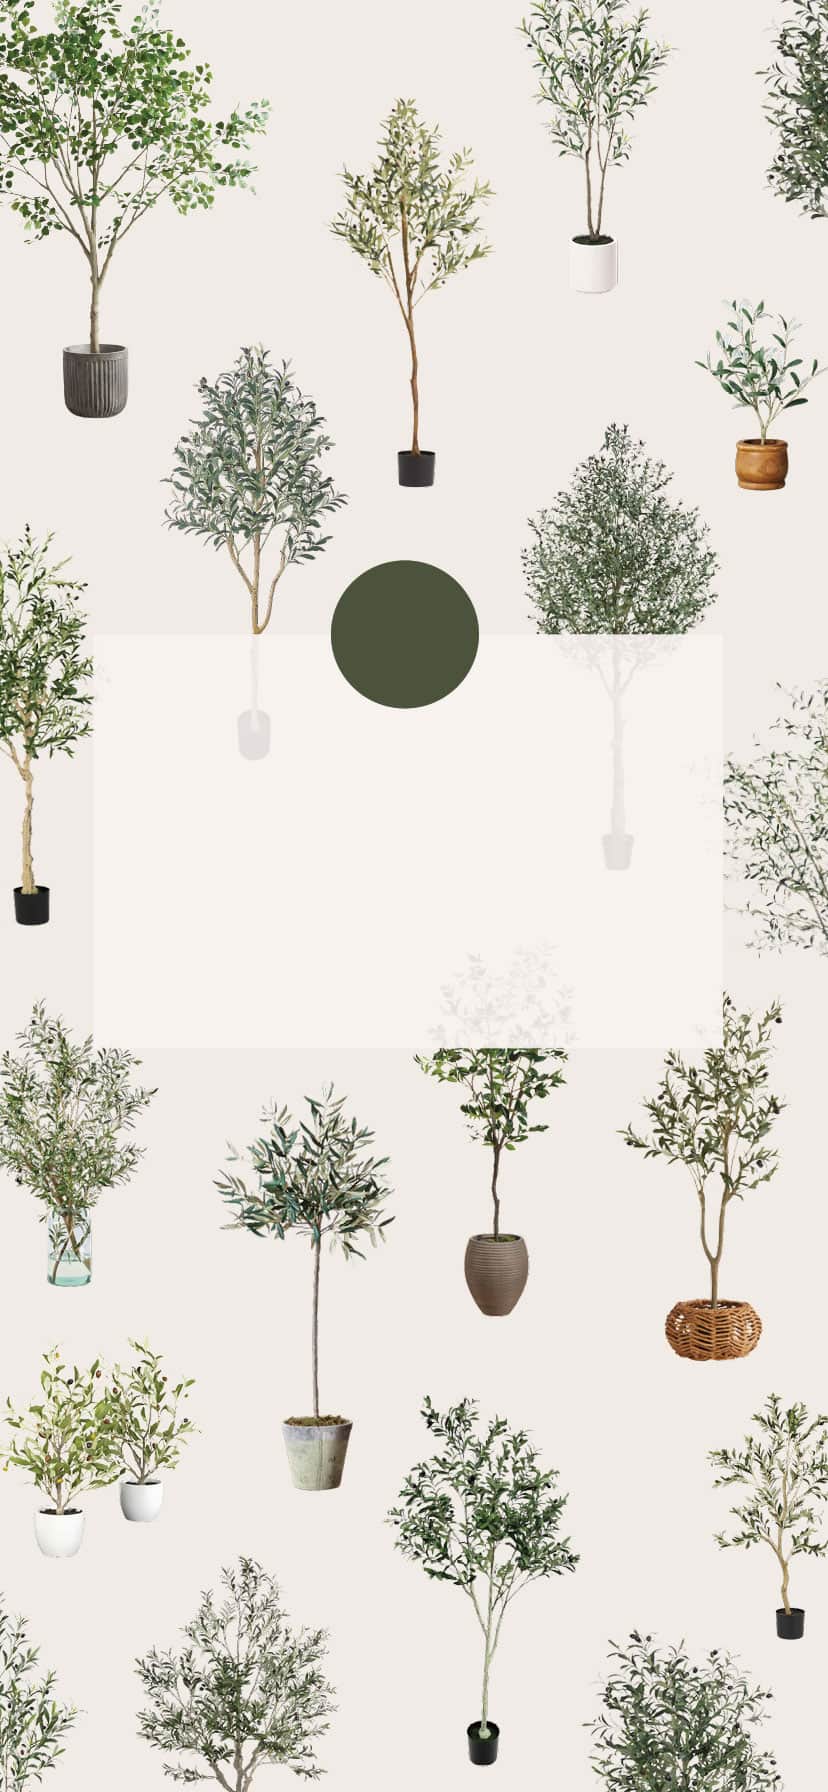 how to make a faux olive tree look better – almost makes perfect